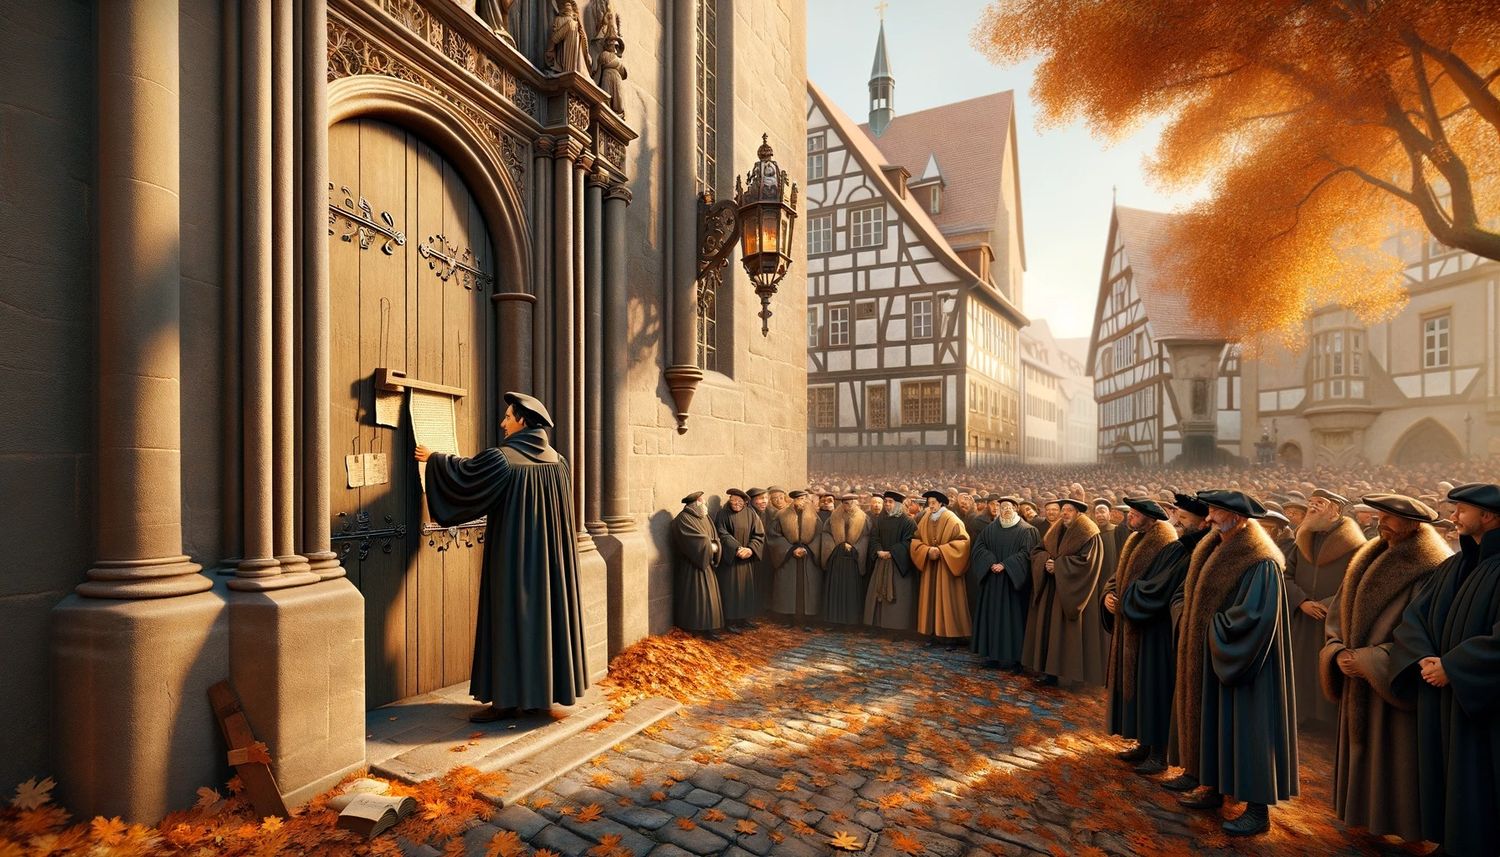 Why Did The Protestant Reformation Occur? To What Extent Are Catholicism And Protestantism Different?